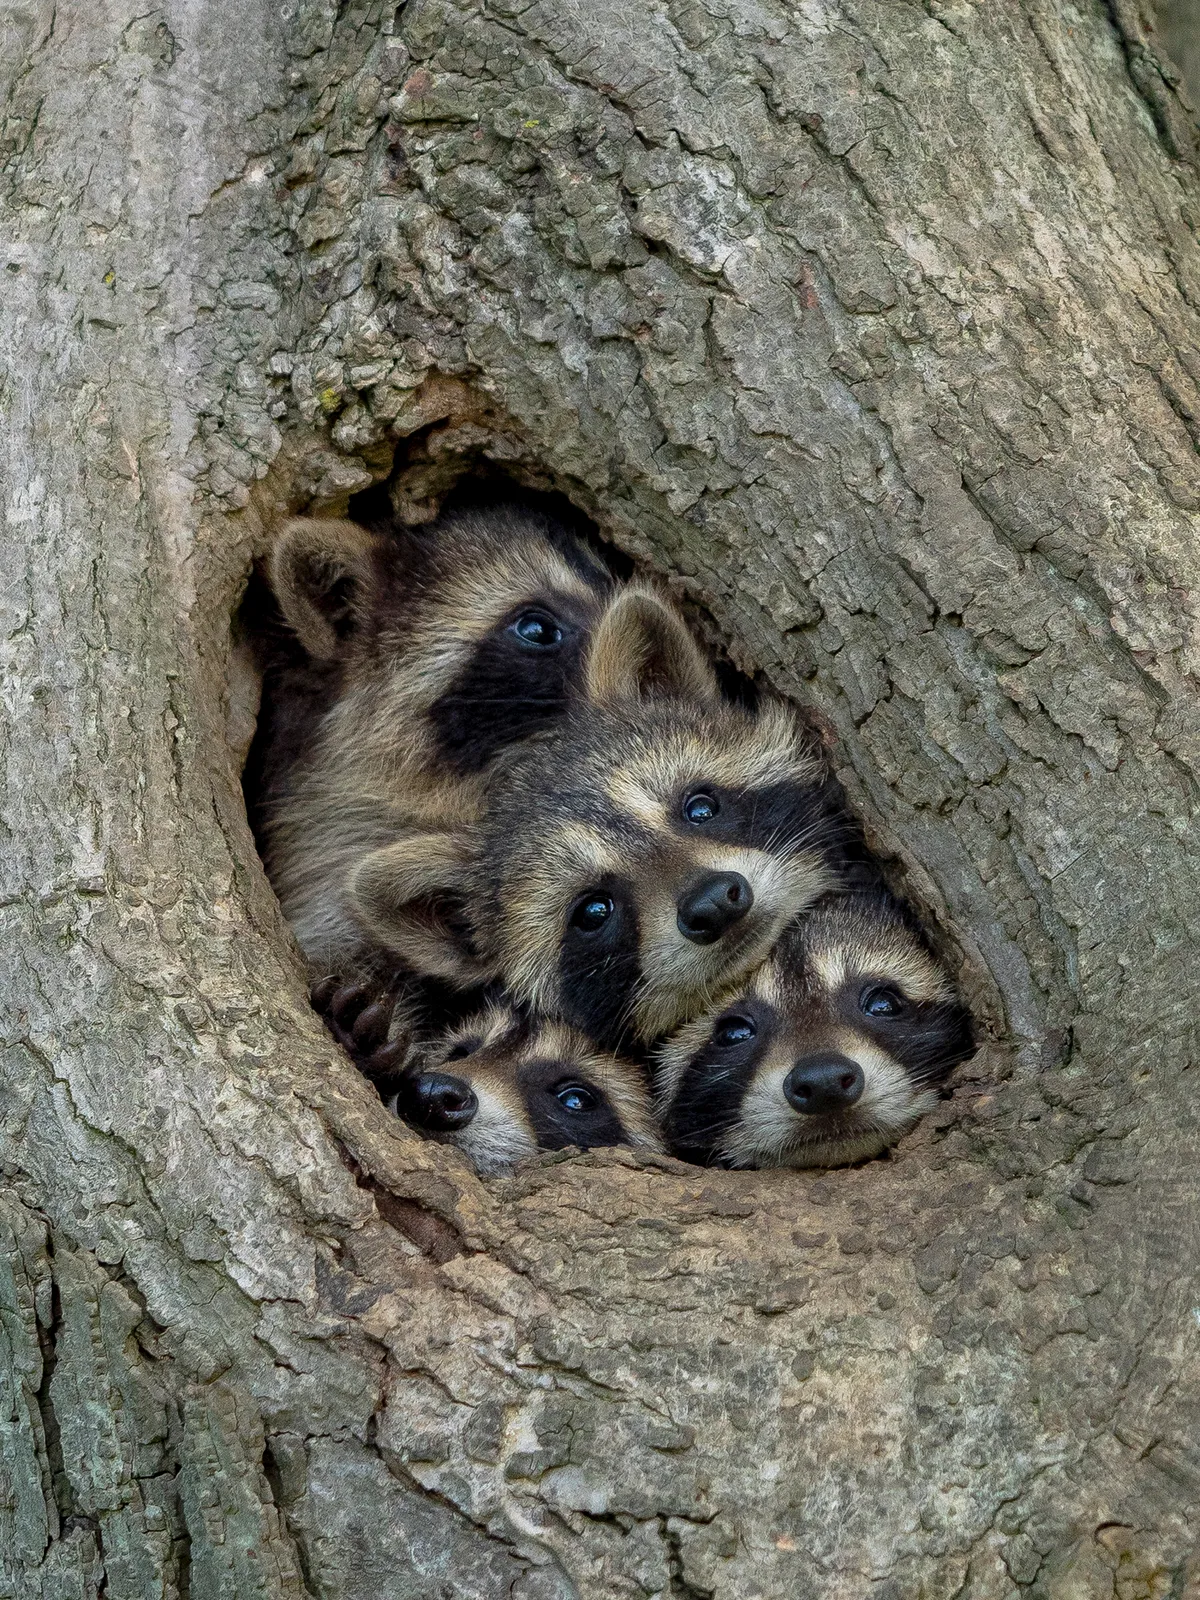 The Comedy Wildlife Photography Awards 2021 Kevin Biskaborn Barrie Canada Phone: Email: Title: Quarantine Life Description: Isolated inside with your family eager to get out and explore the world? These eastern raccoon kits are too. Just when you think there's no more room in the tree hollow, mother raccoon appears and displays just how compact the space is. The babies clambered all over their mom and each another, struggling to take a look at the exact same time. This photo was taken in Southwestern Ontario, Canada. After exploring a particular area with numerous tree hallows, I identified it as a hot spot for raccoon families. Since raccoons will move from den to den, often not spending more than one night at a time in a particular den, locating an area with numerous options is key to locating the animals. I stumbled across this family and immediately worked on leveling the camera with the hole to prevent an upward angle. When the camera and tripod were ready, the baby raccoons were extremely curious (and cooperative), sticking their heads out for a closer look! Animal: Raccoon / Procyon lotor Location of shot: Southwestern Ontario, Canada